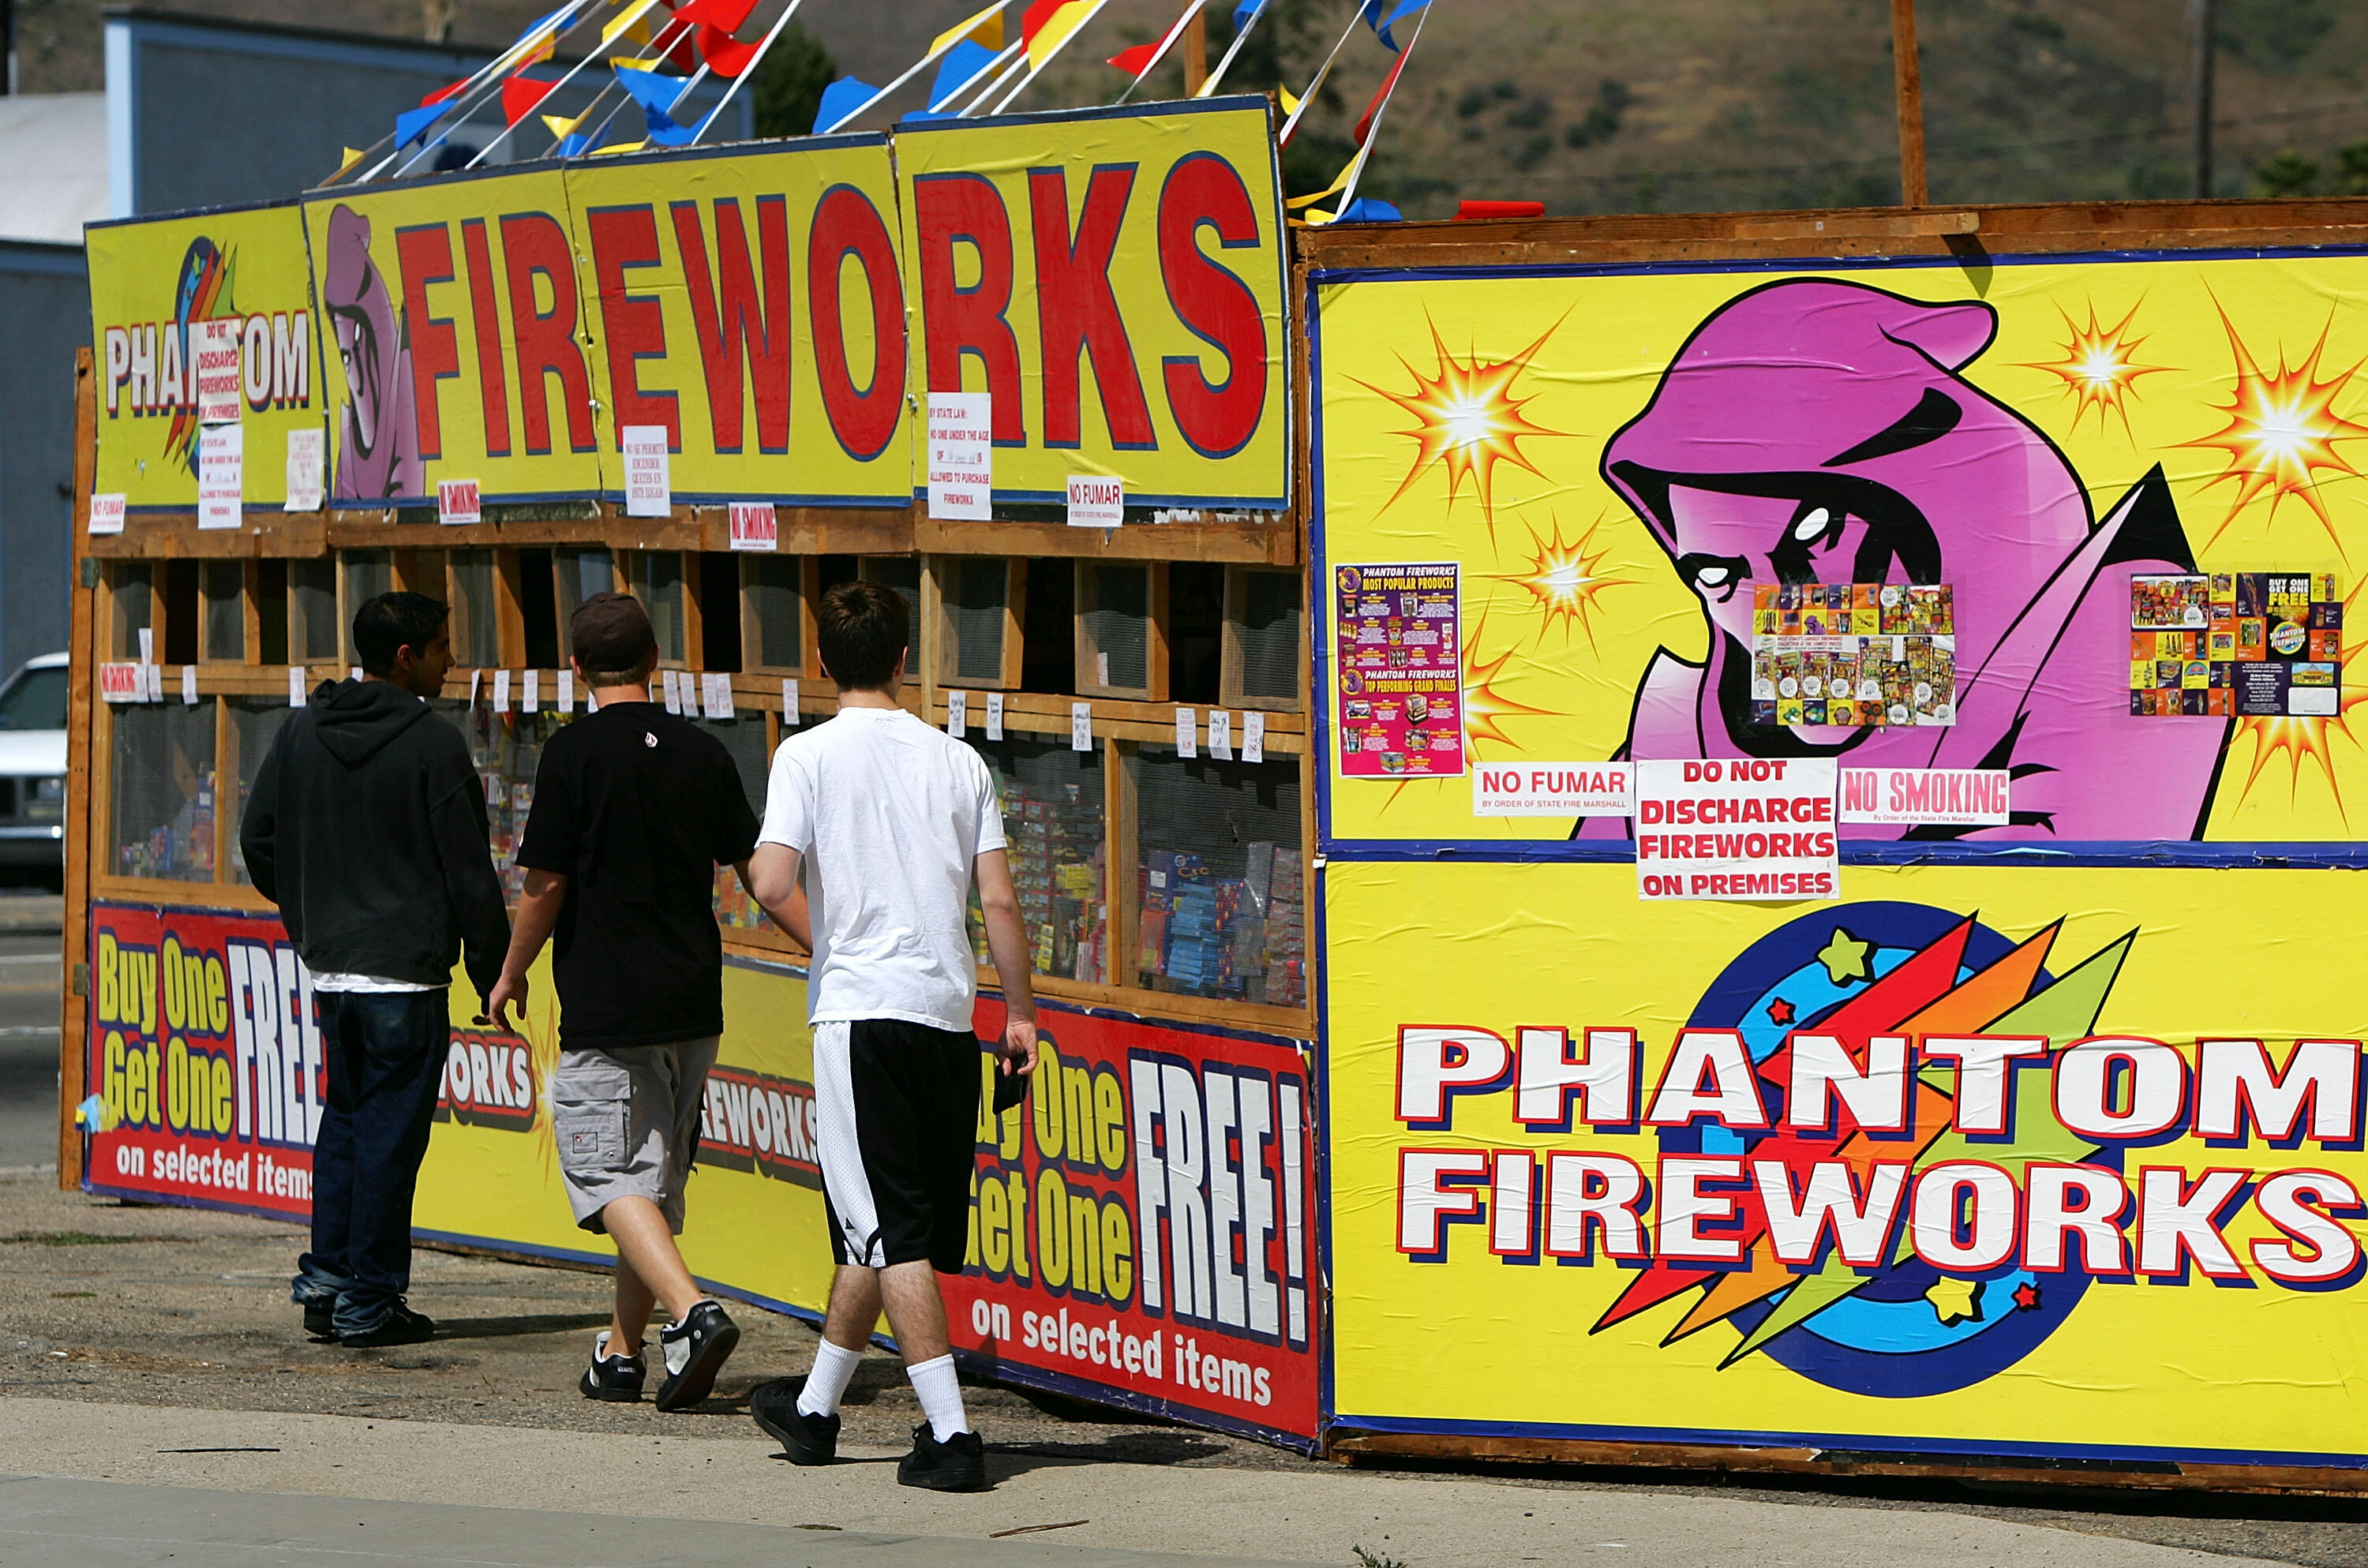 Fireworks To Be In Short Supply Before July 4 Says Oklahoma Retailers ...